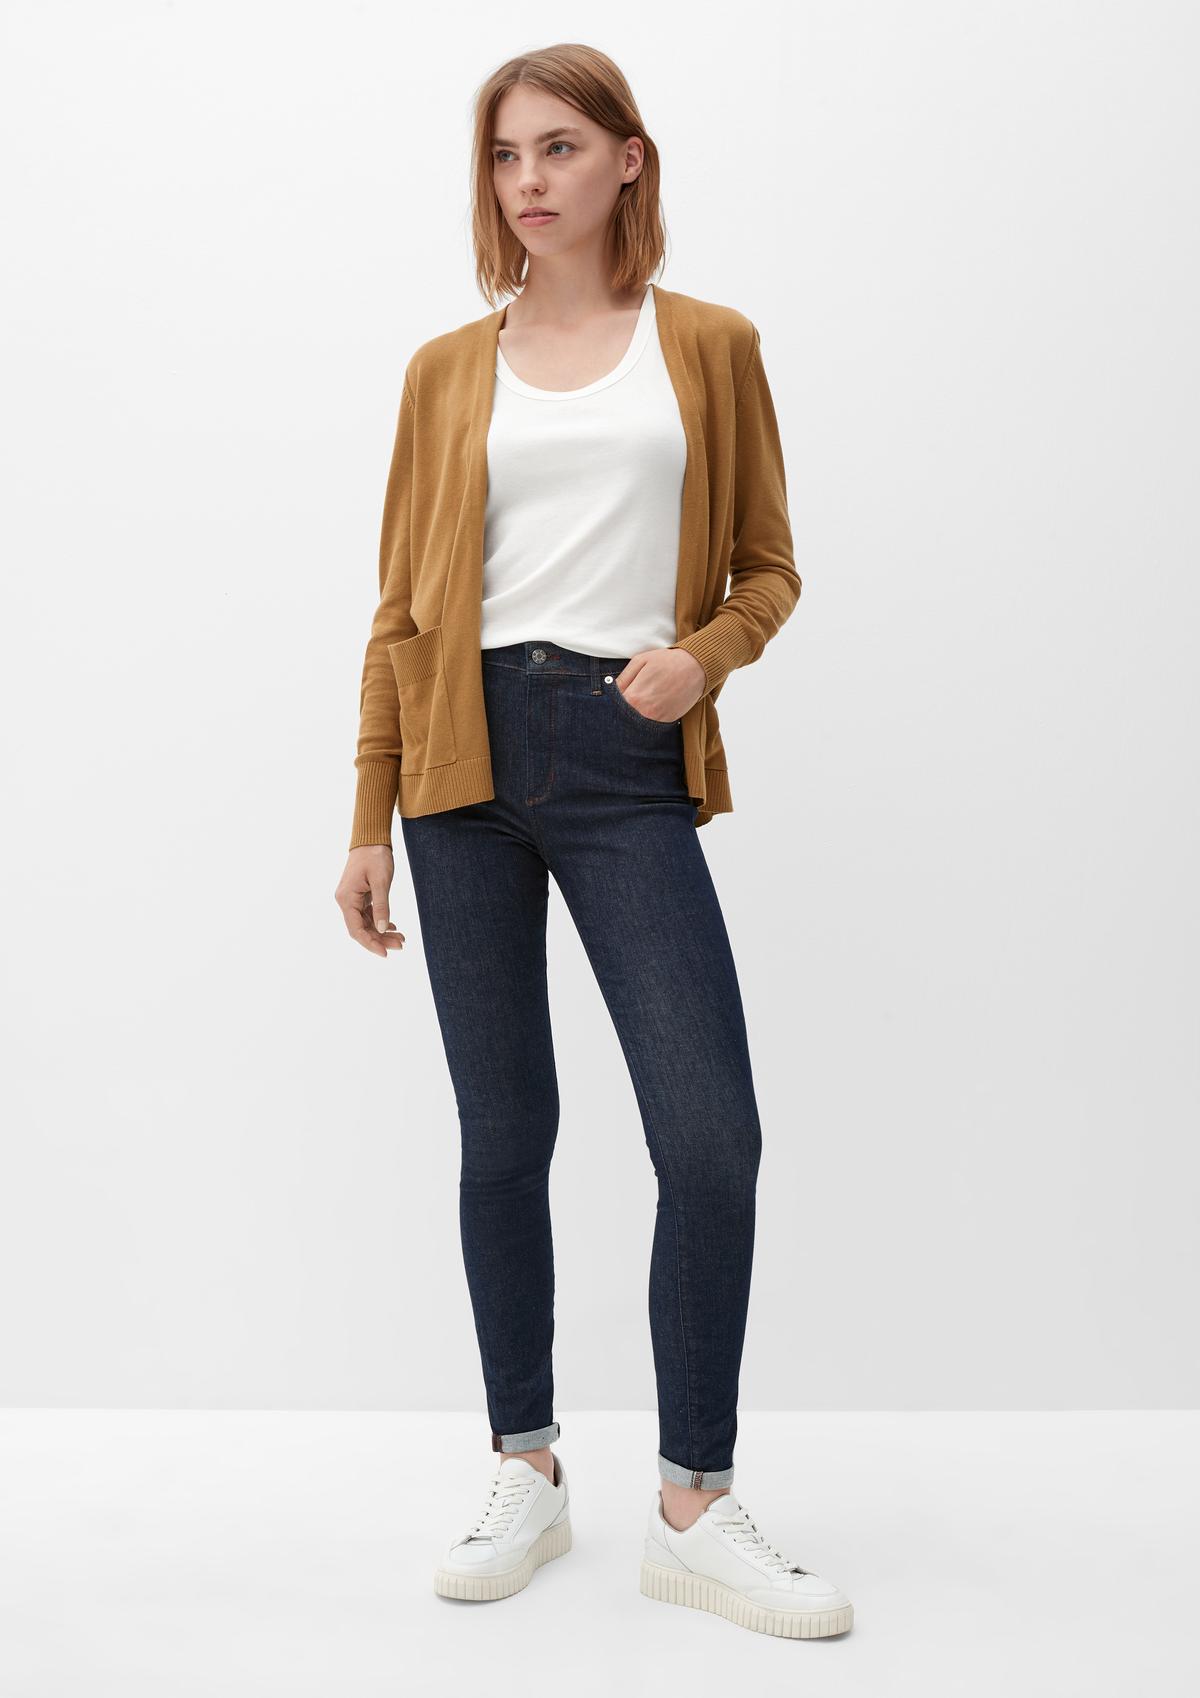 s.Oliver Open-fronted knit cardigan